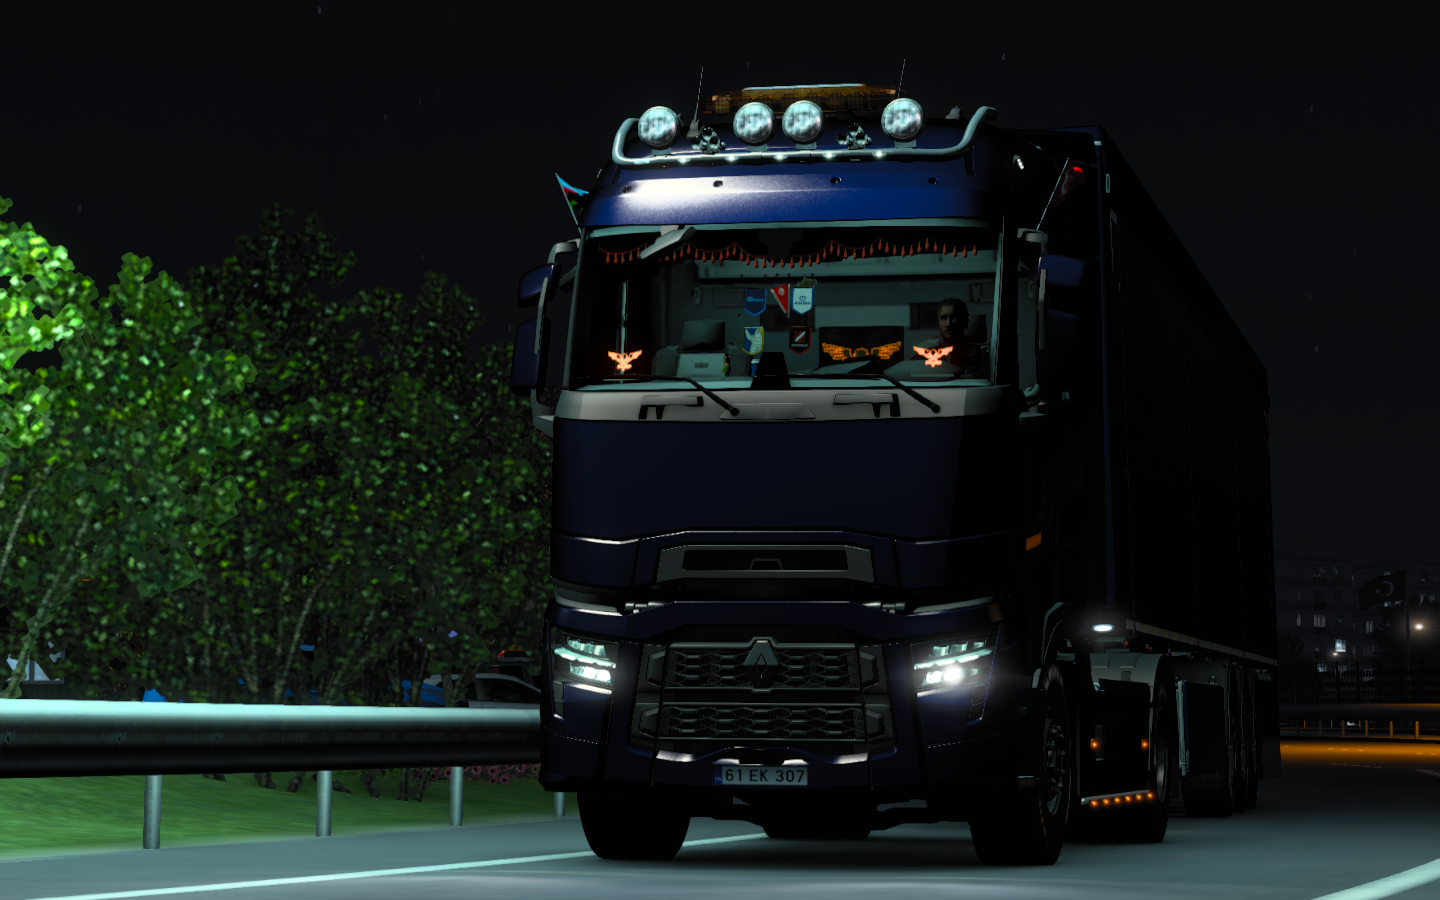 ets2_20210406_144105_00.png